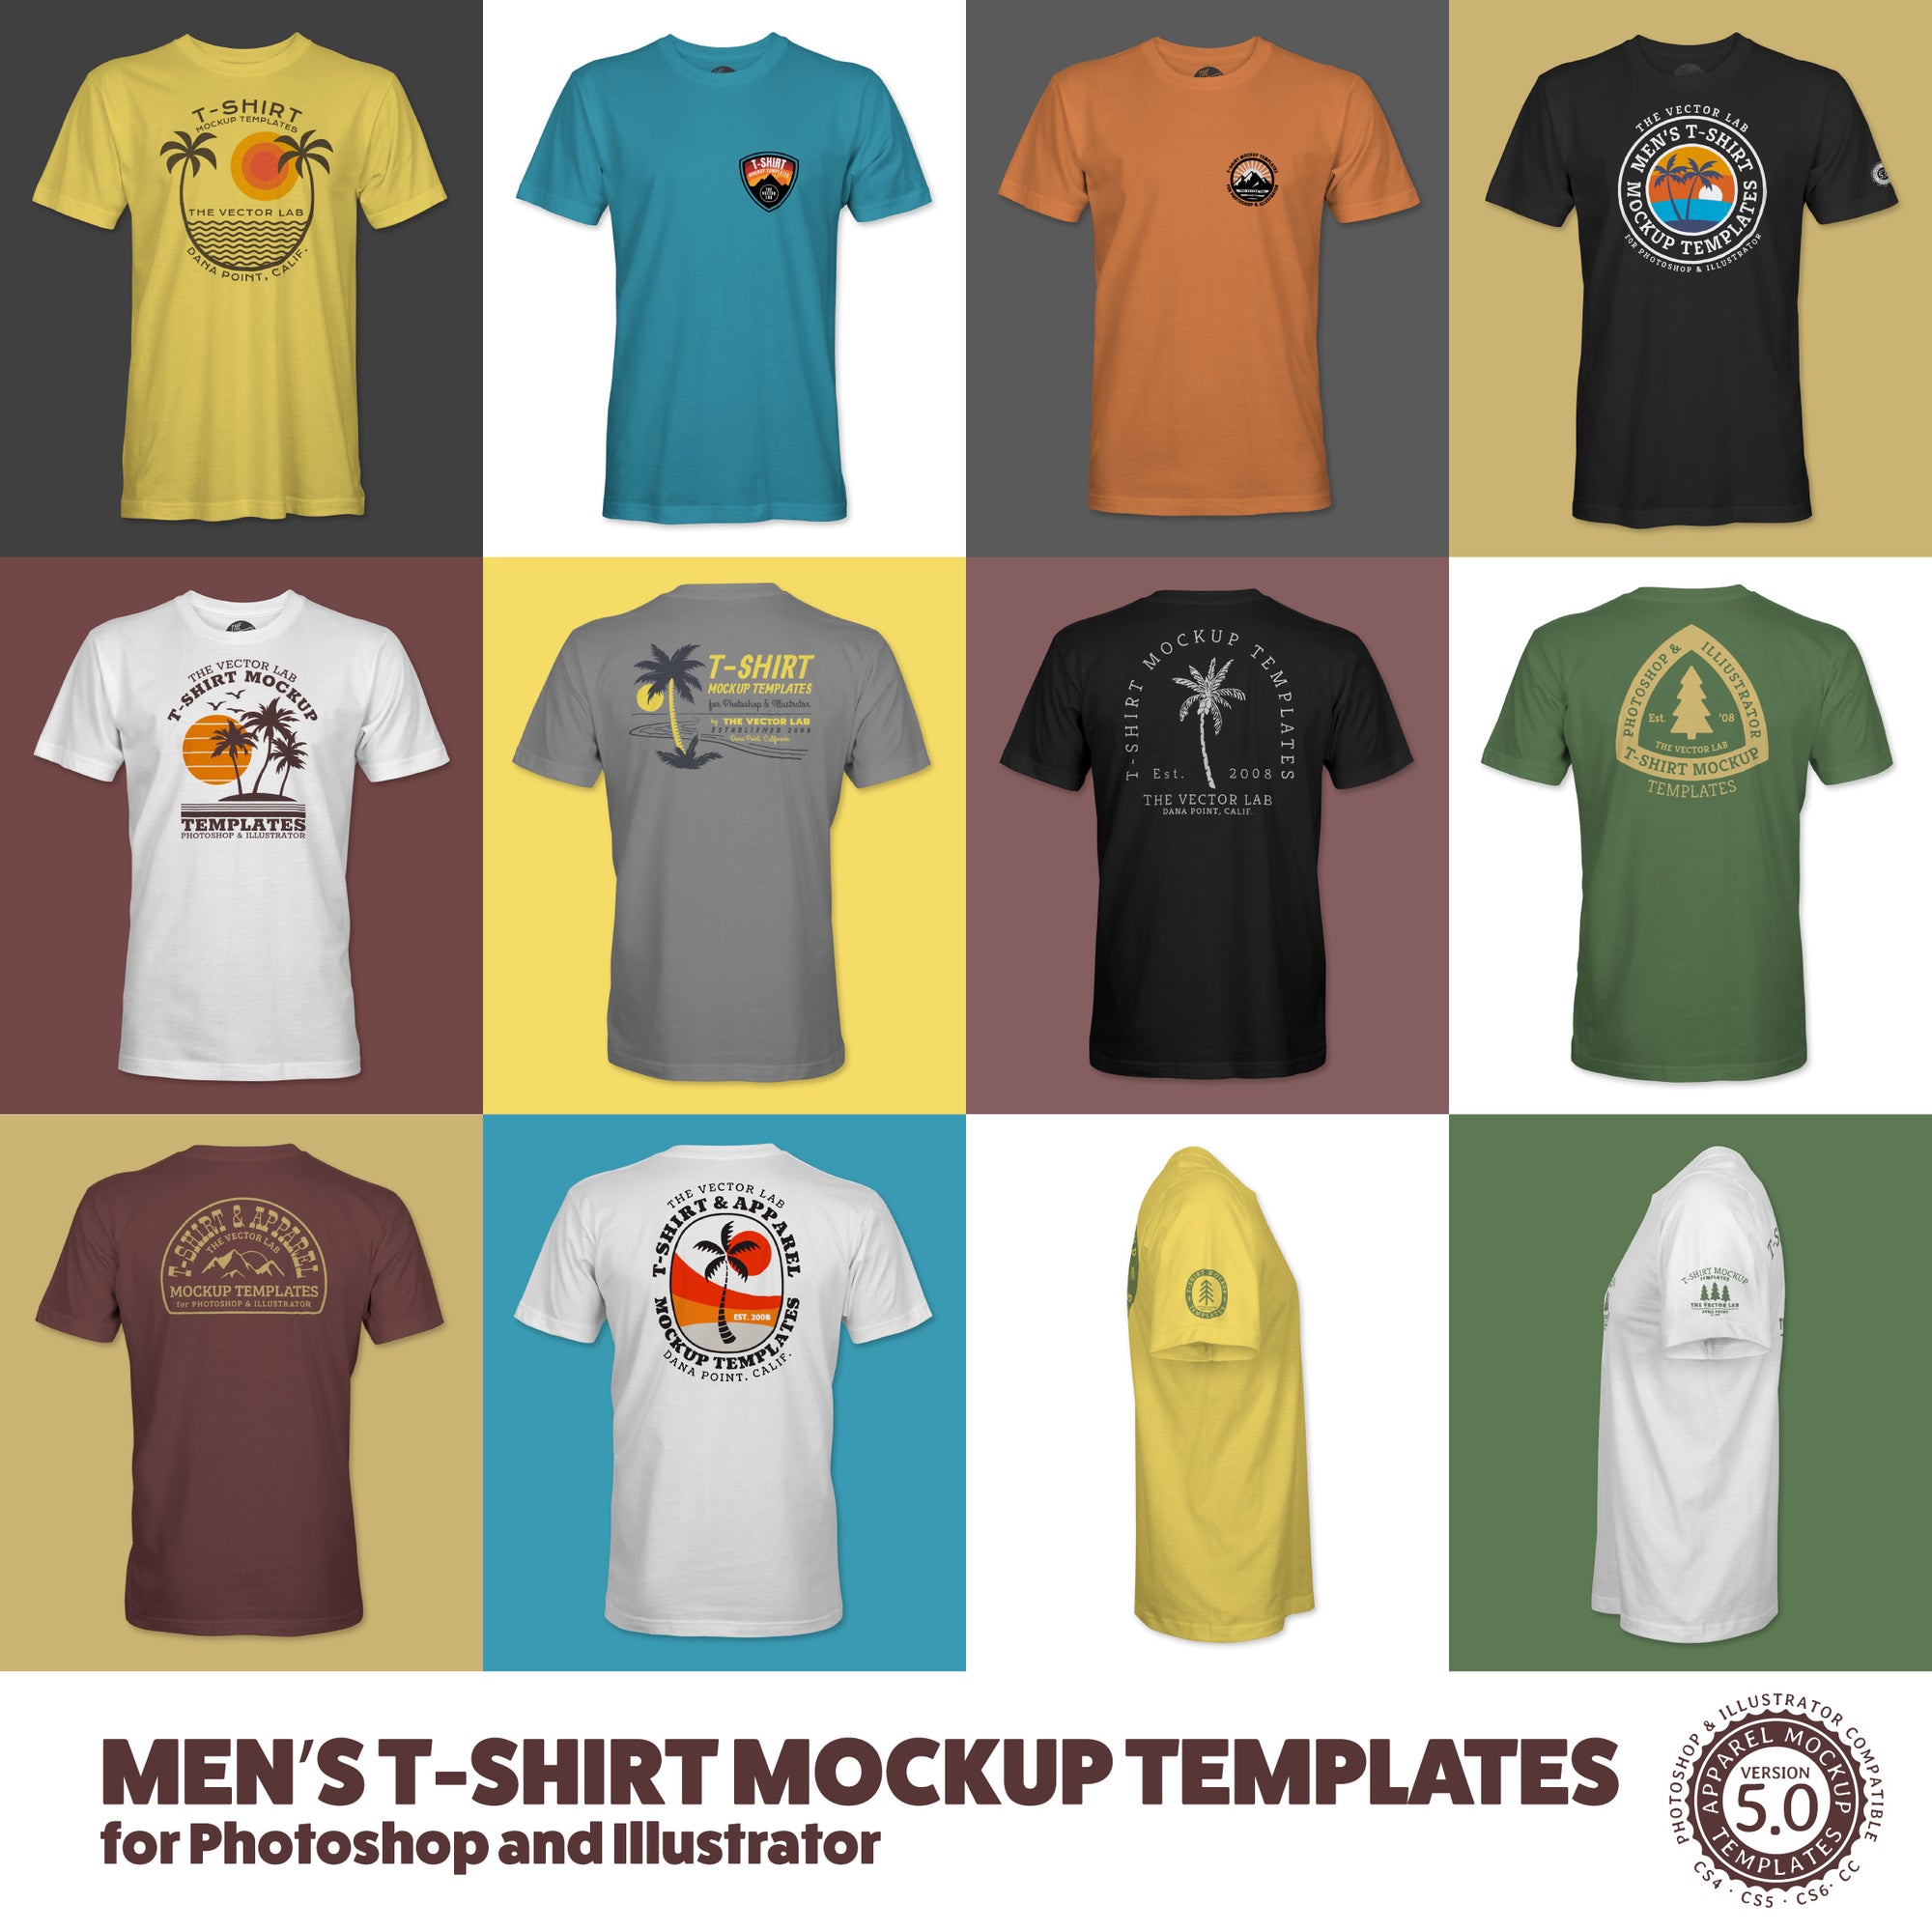 Download Men's T-Shirt Mockup Templates for Adobe - TheVectorLab